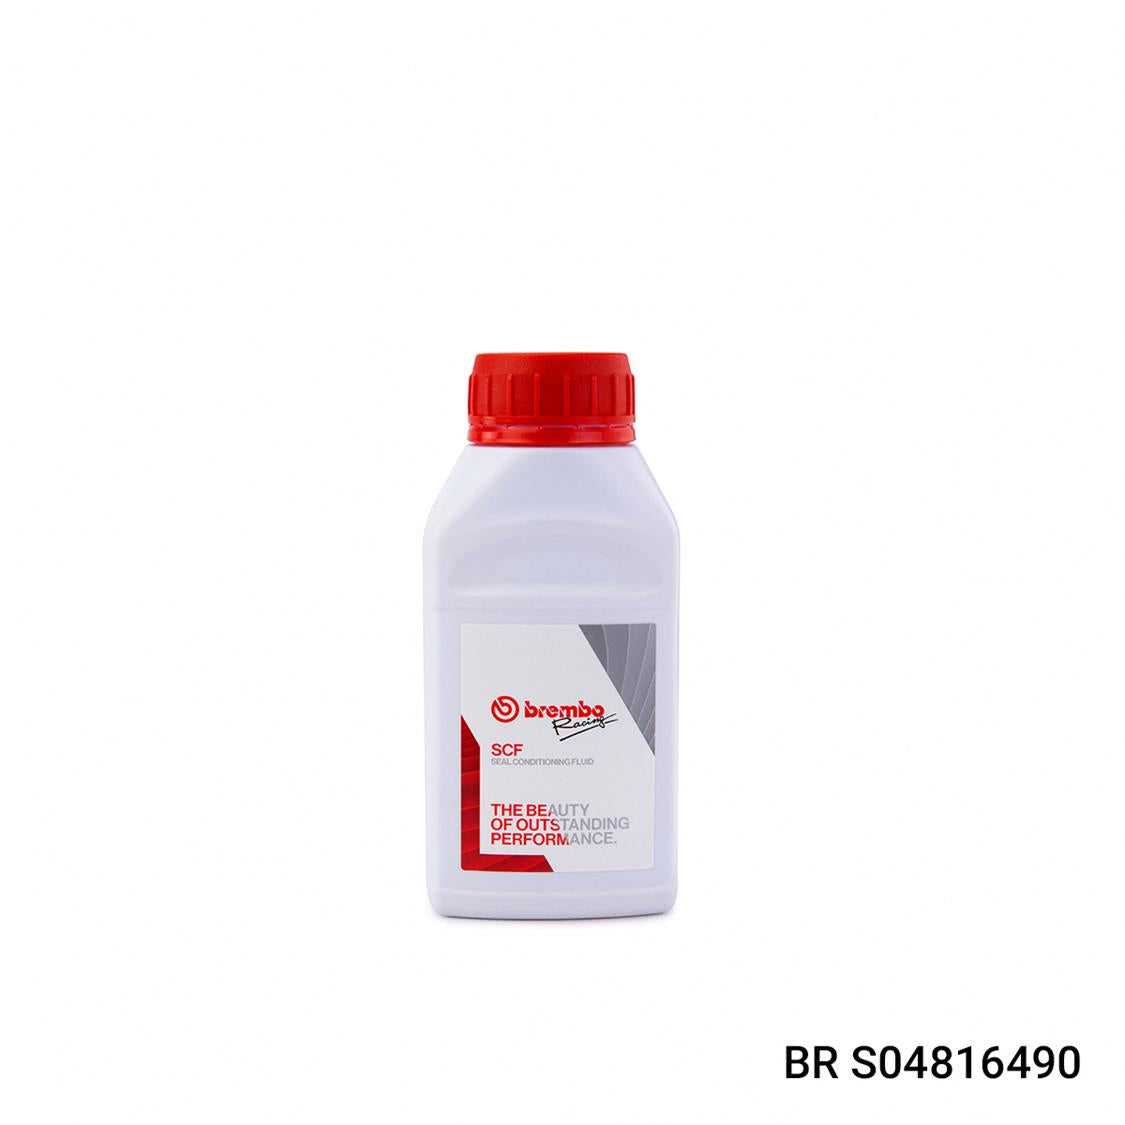 BREMBO, Brembo seal conditioning fluid - 250 ml